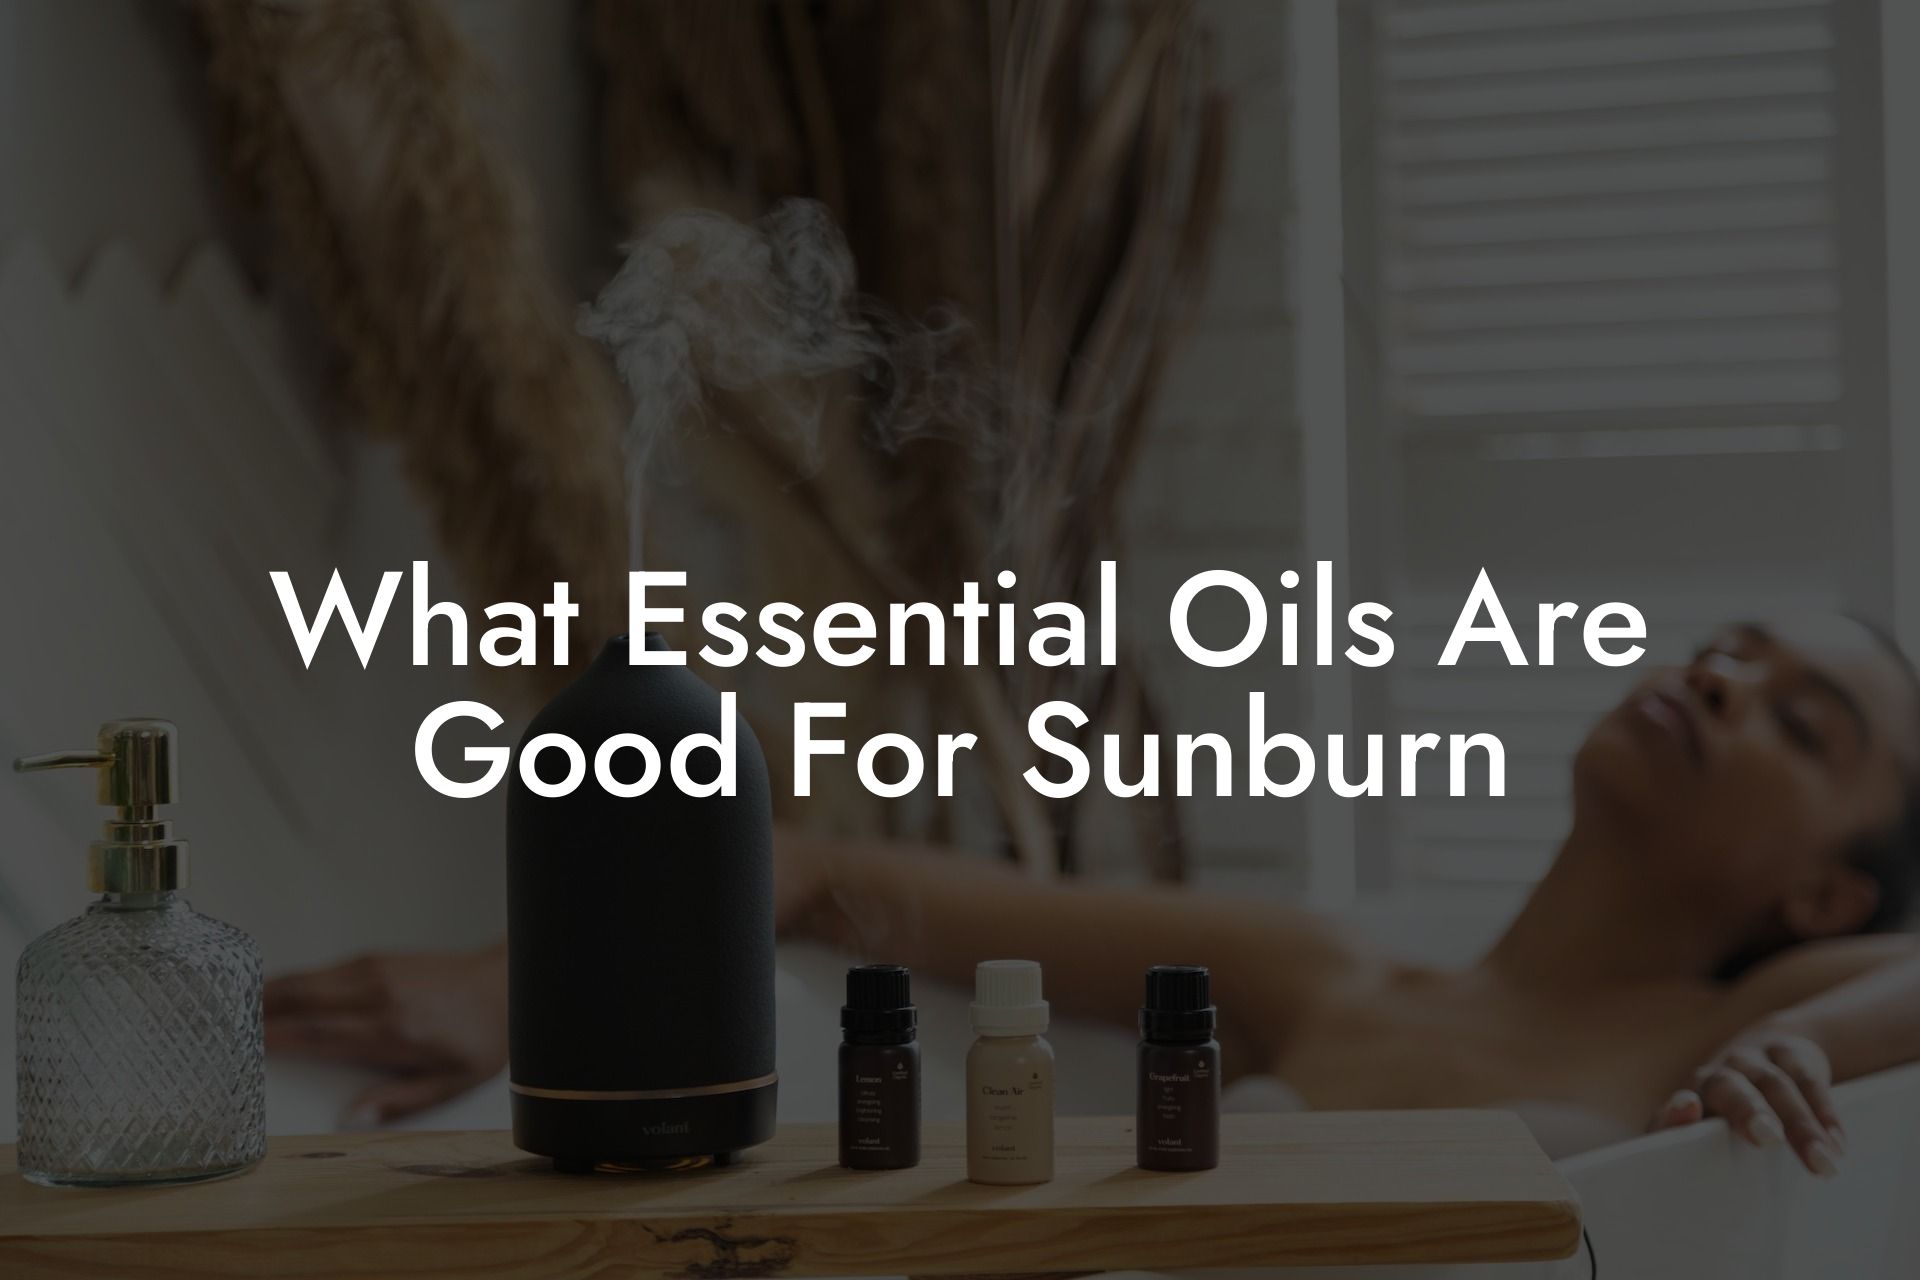 What Essential Oils Are Good For Sunburn